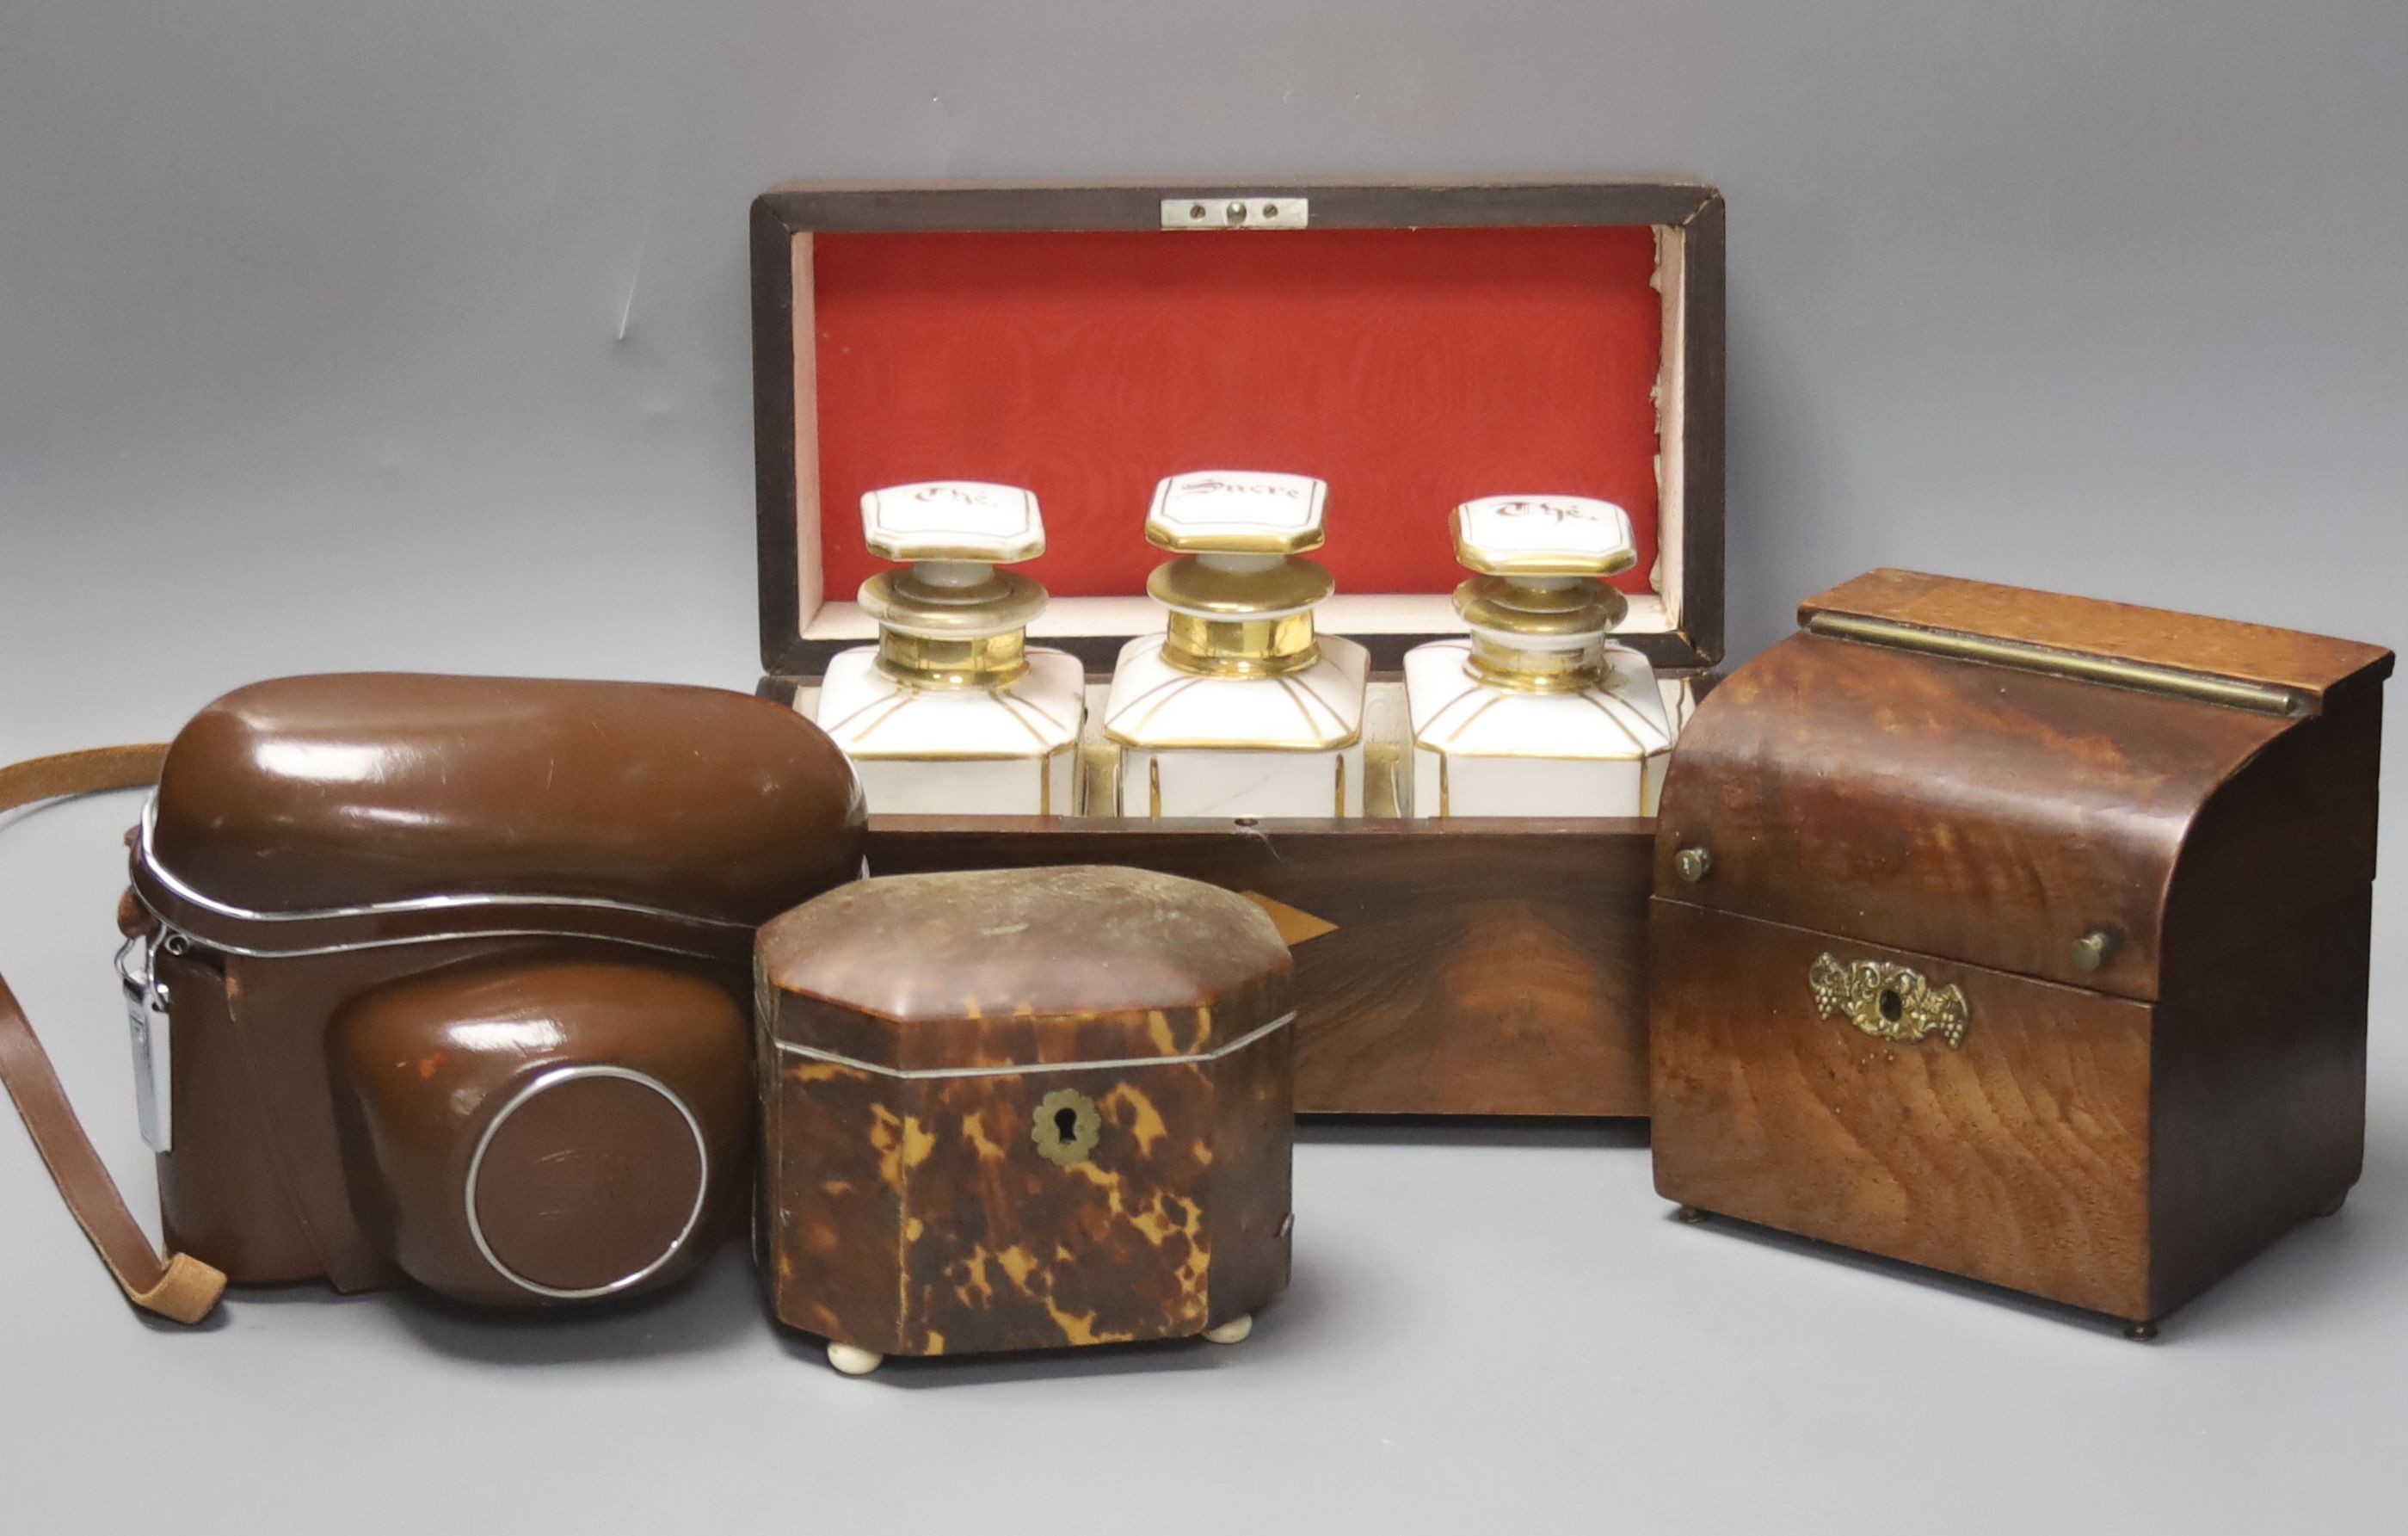 A French rosewood tea caddy, a tortoishell box, a camera and another box